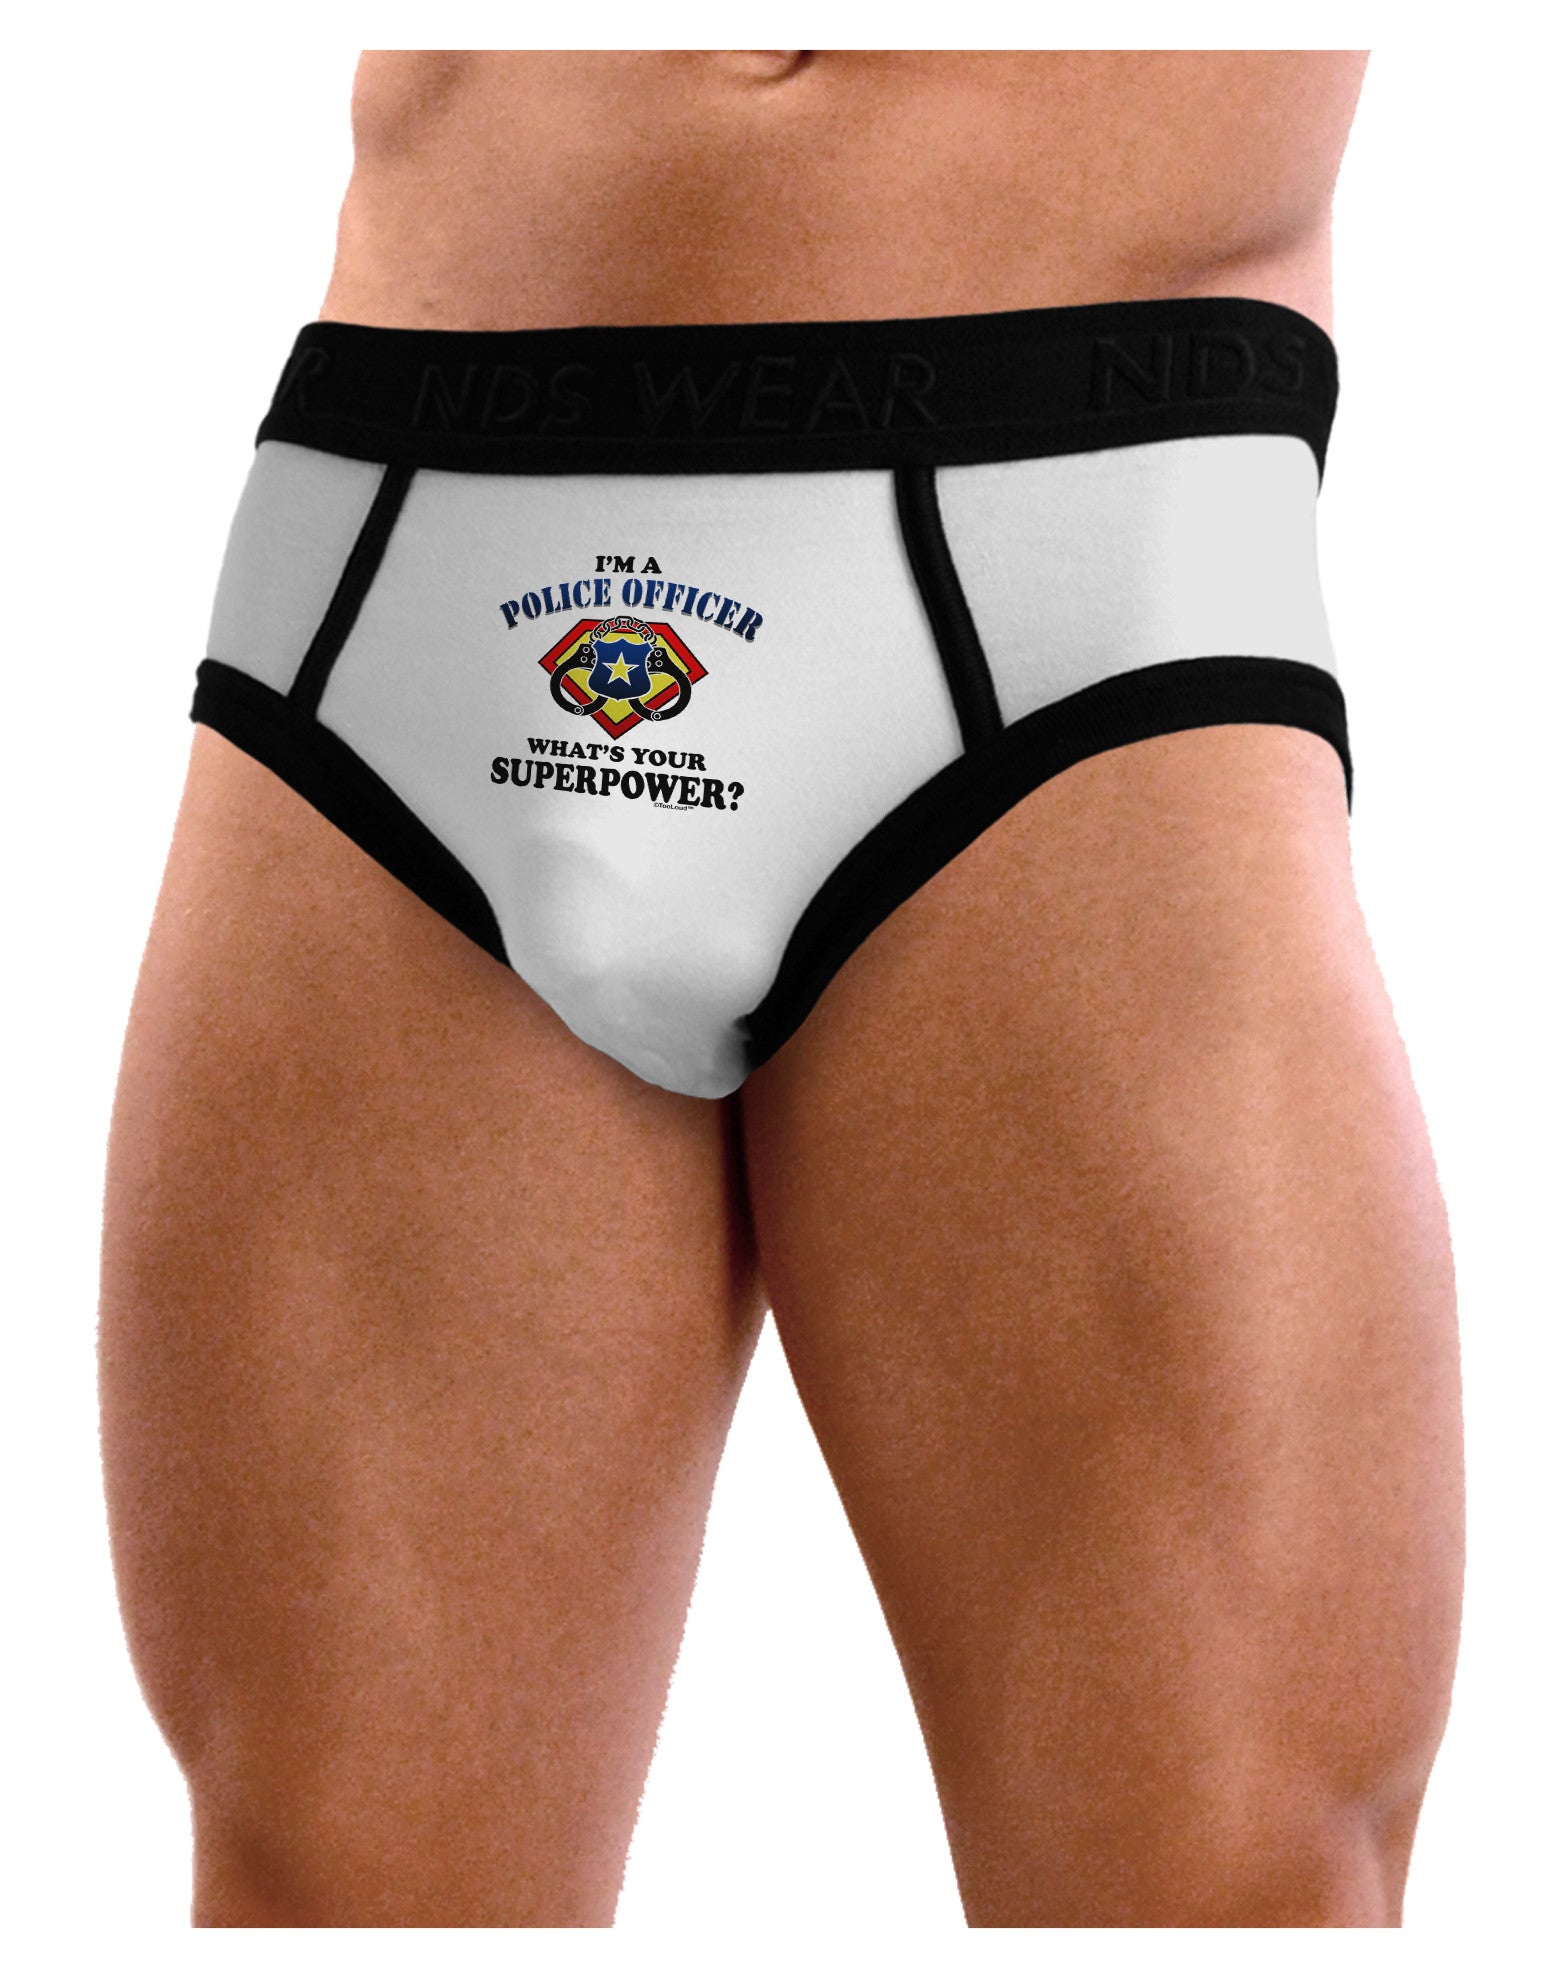  NDS Wear TooLoud Police Officer - Superpower Mens Boxer Brief  Underwear - Small : Clothing, Shoes & Jewelry